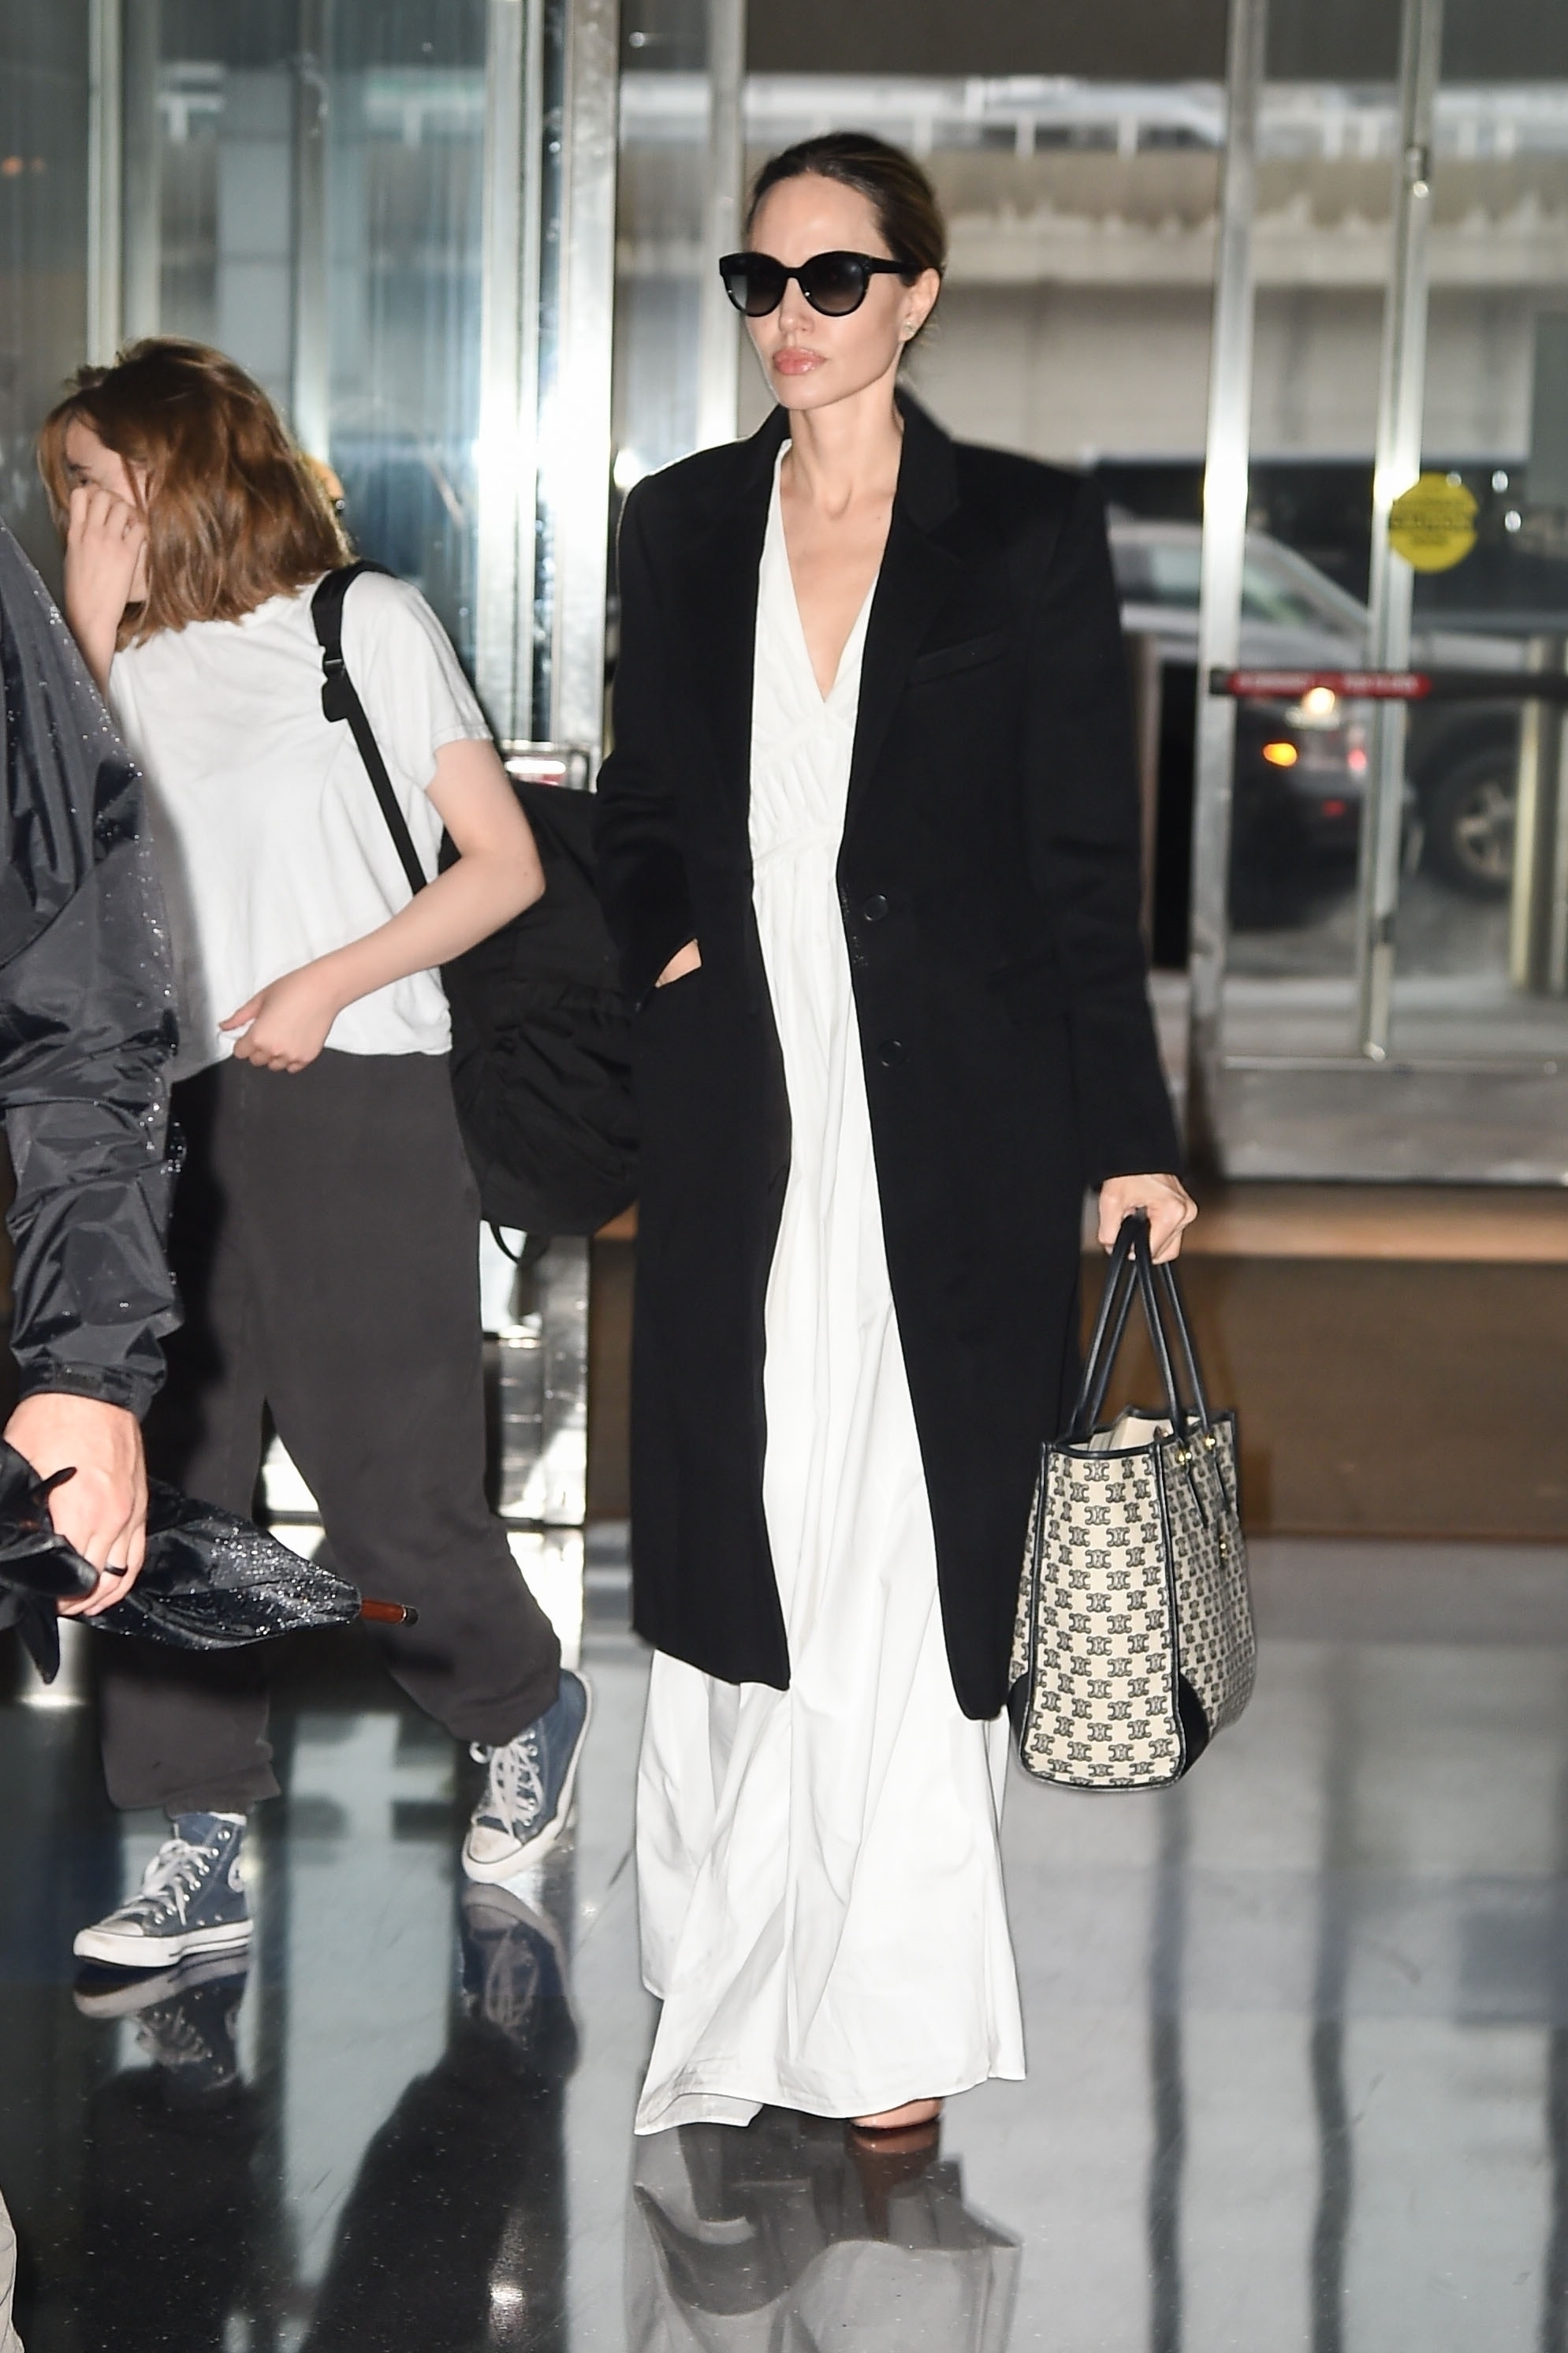 Angelina Jolie was photographed with her rarely-seen daughter, Vivienne, 15, at the JFK airport